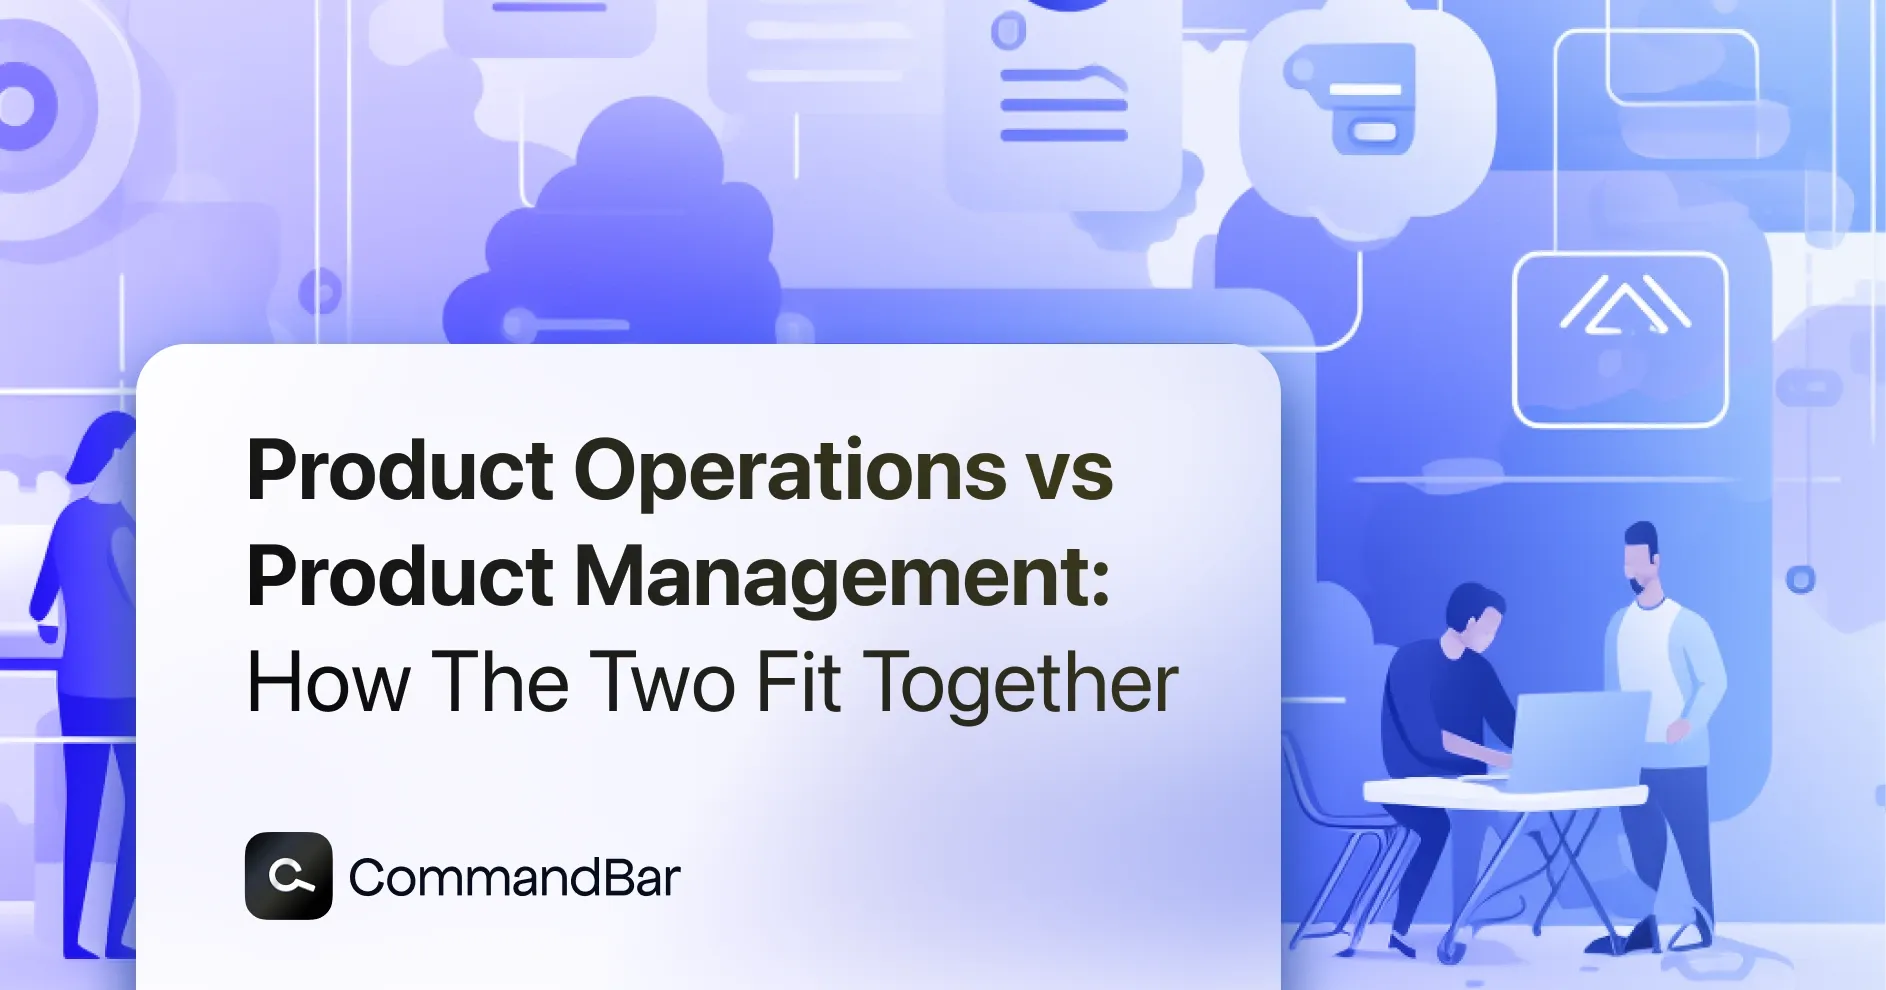 Product operations vs Product 
management: How the two fit together